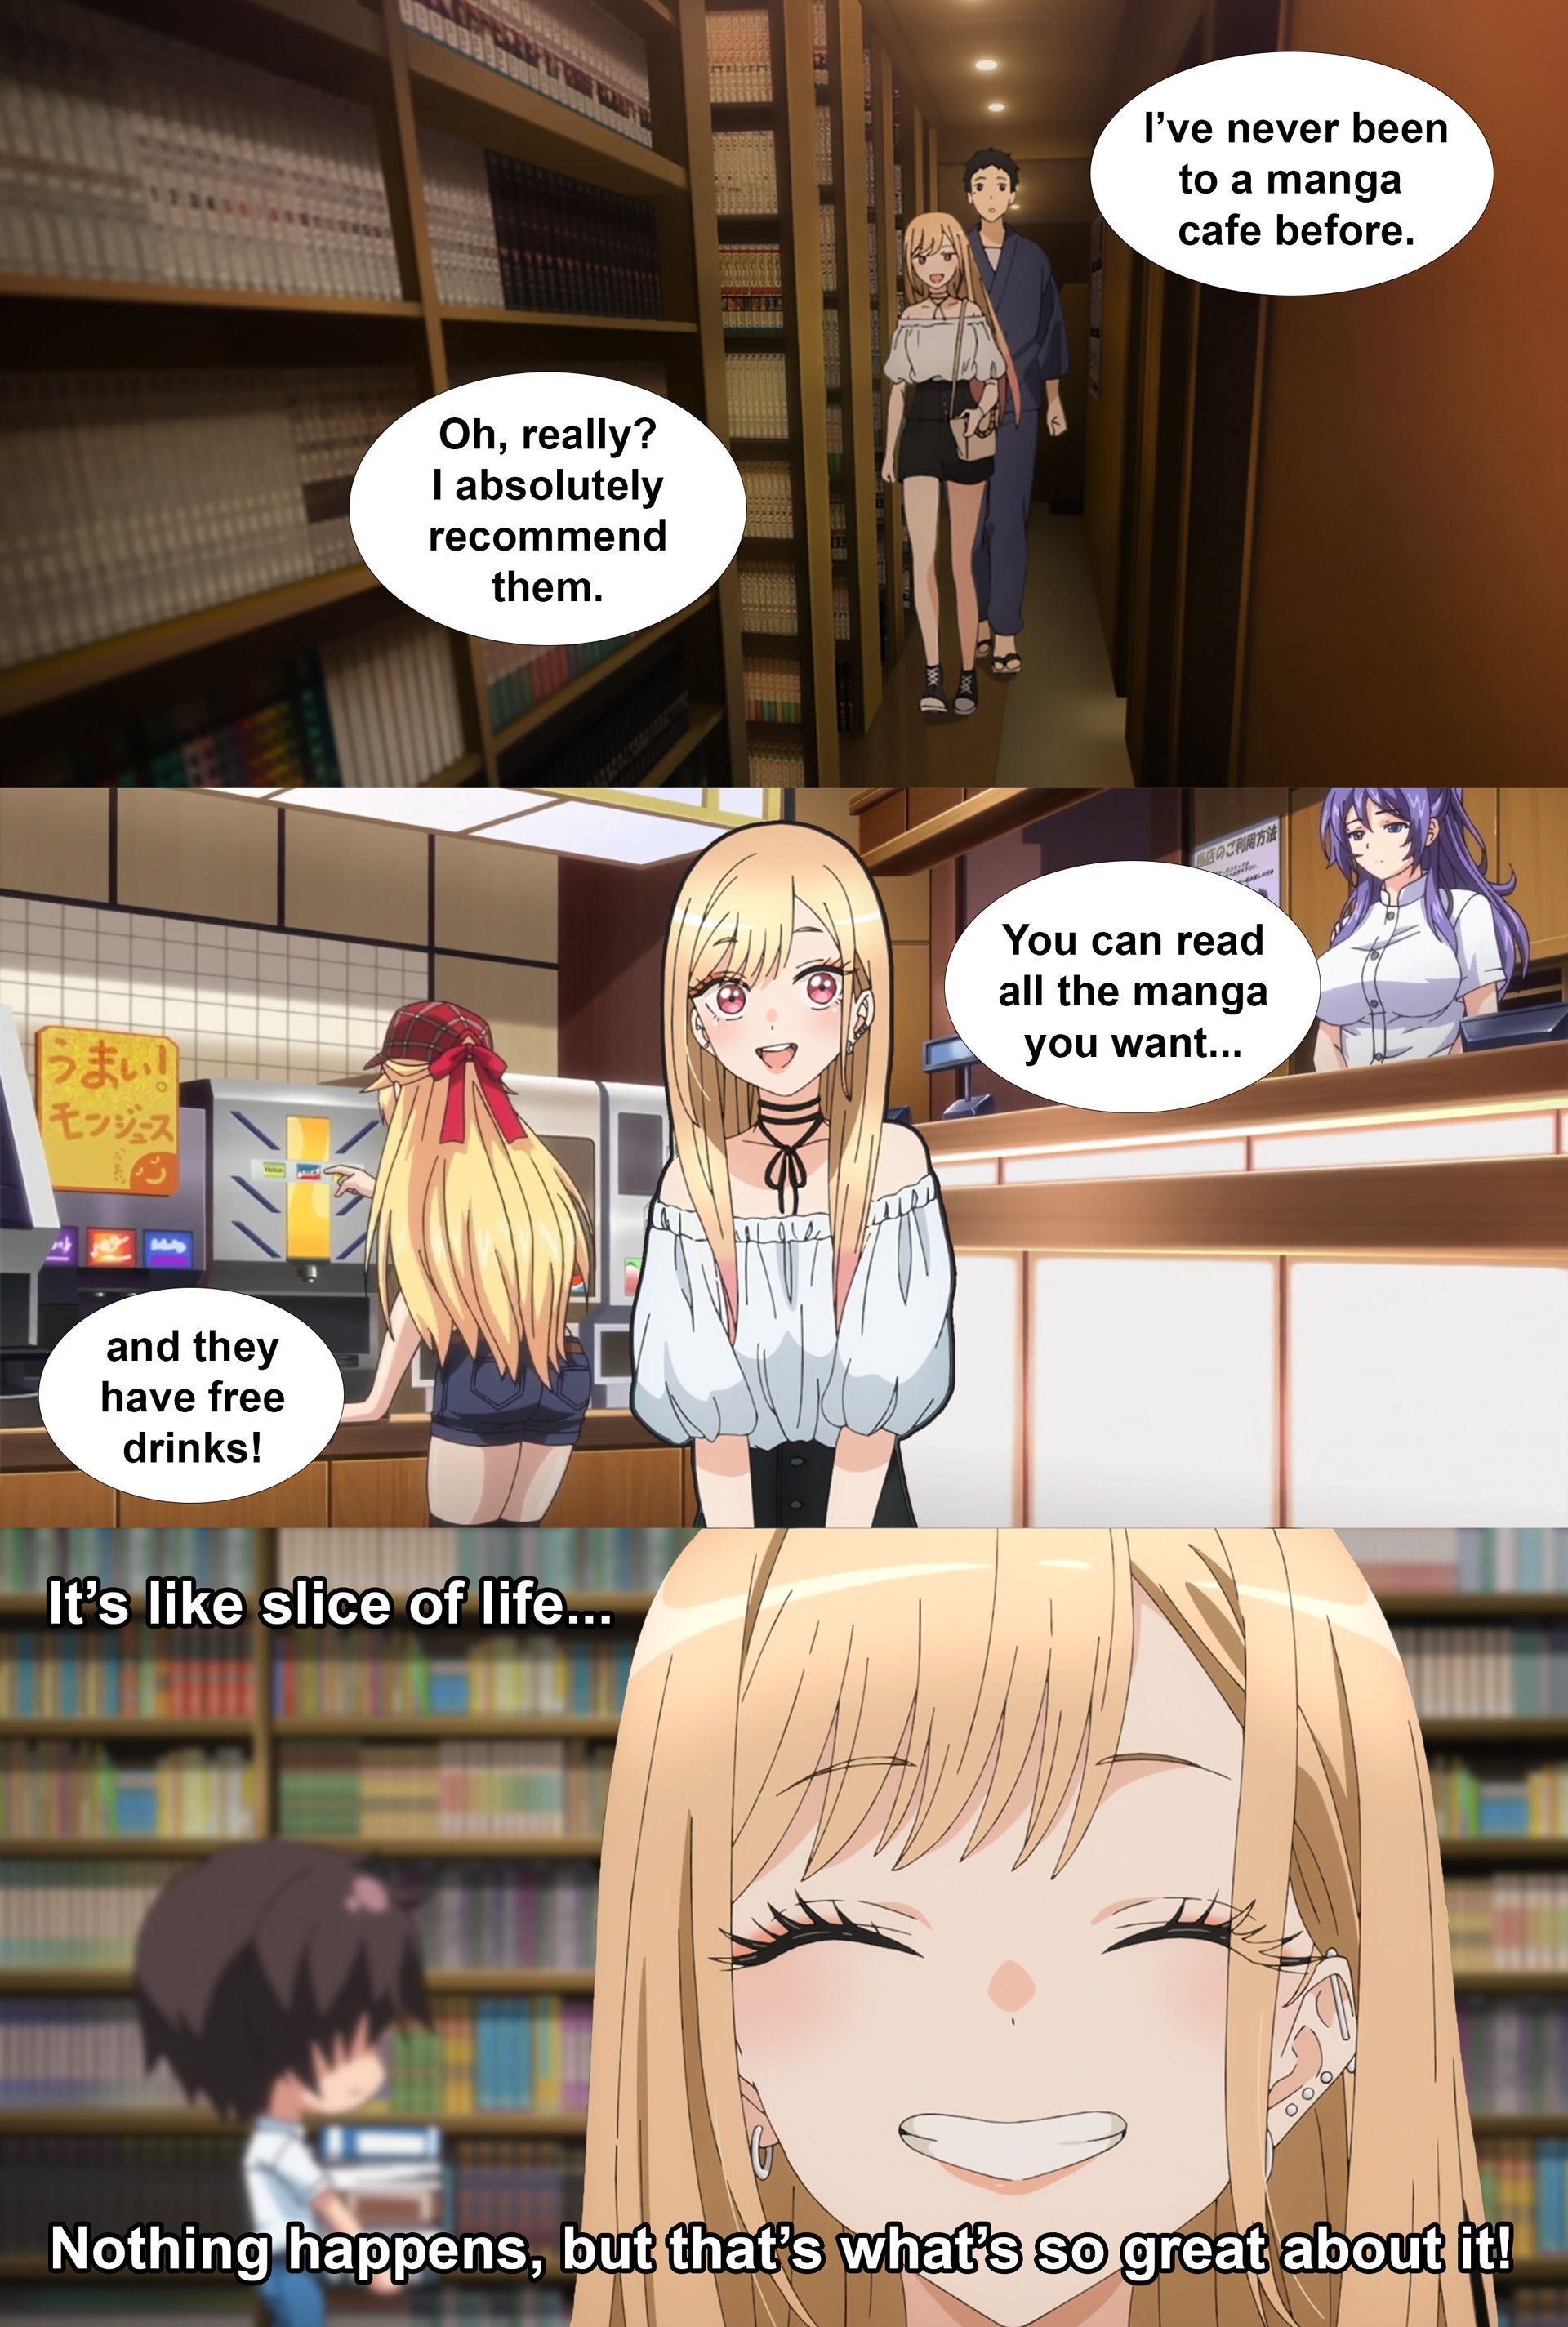 What Happens in the Manga Cafe stays in the Manga Cafe